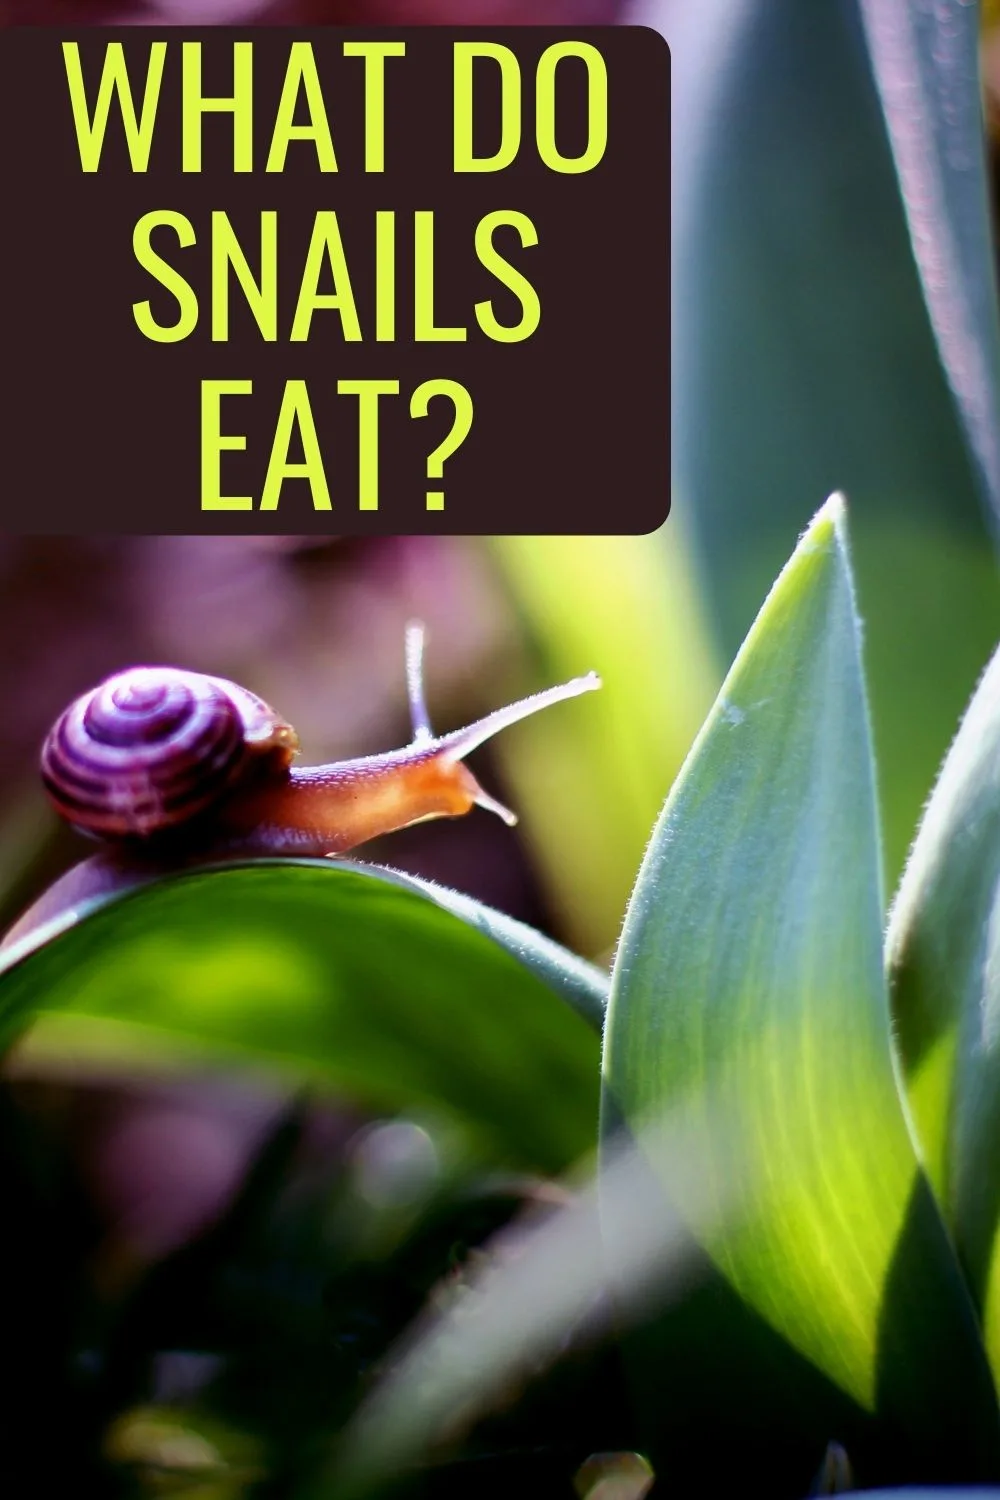 what do snails eat?